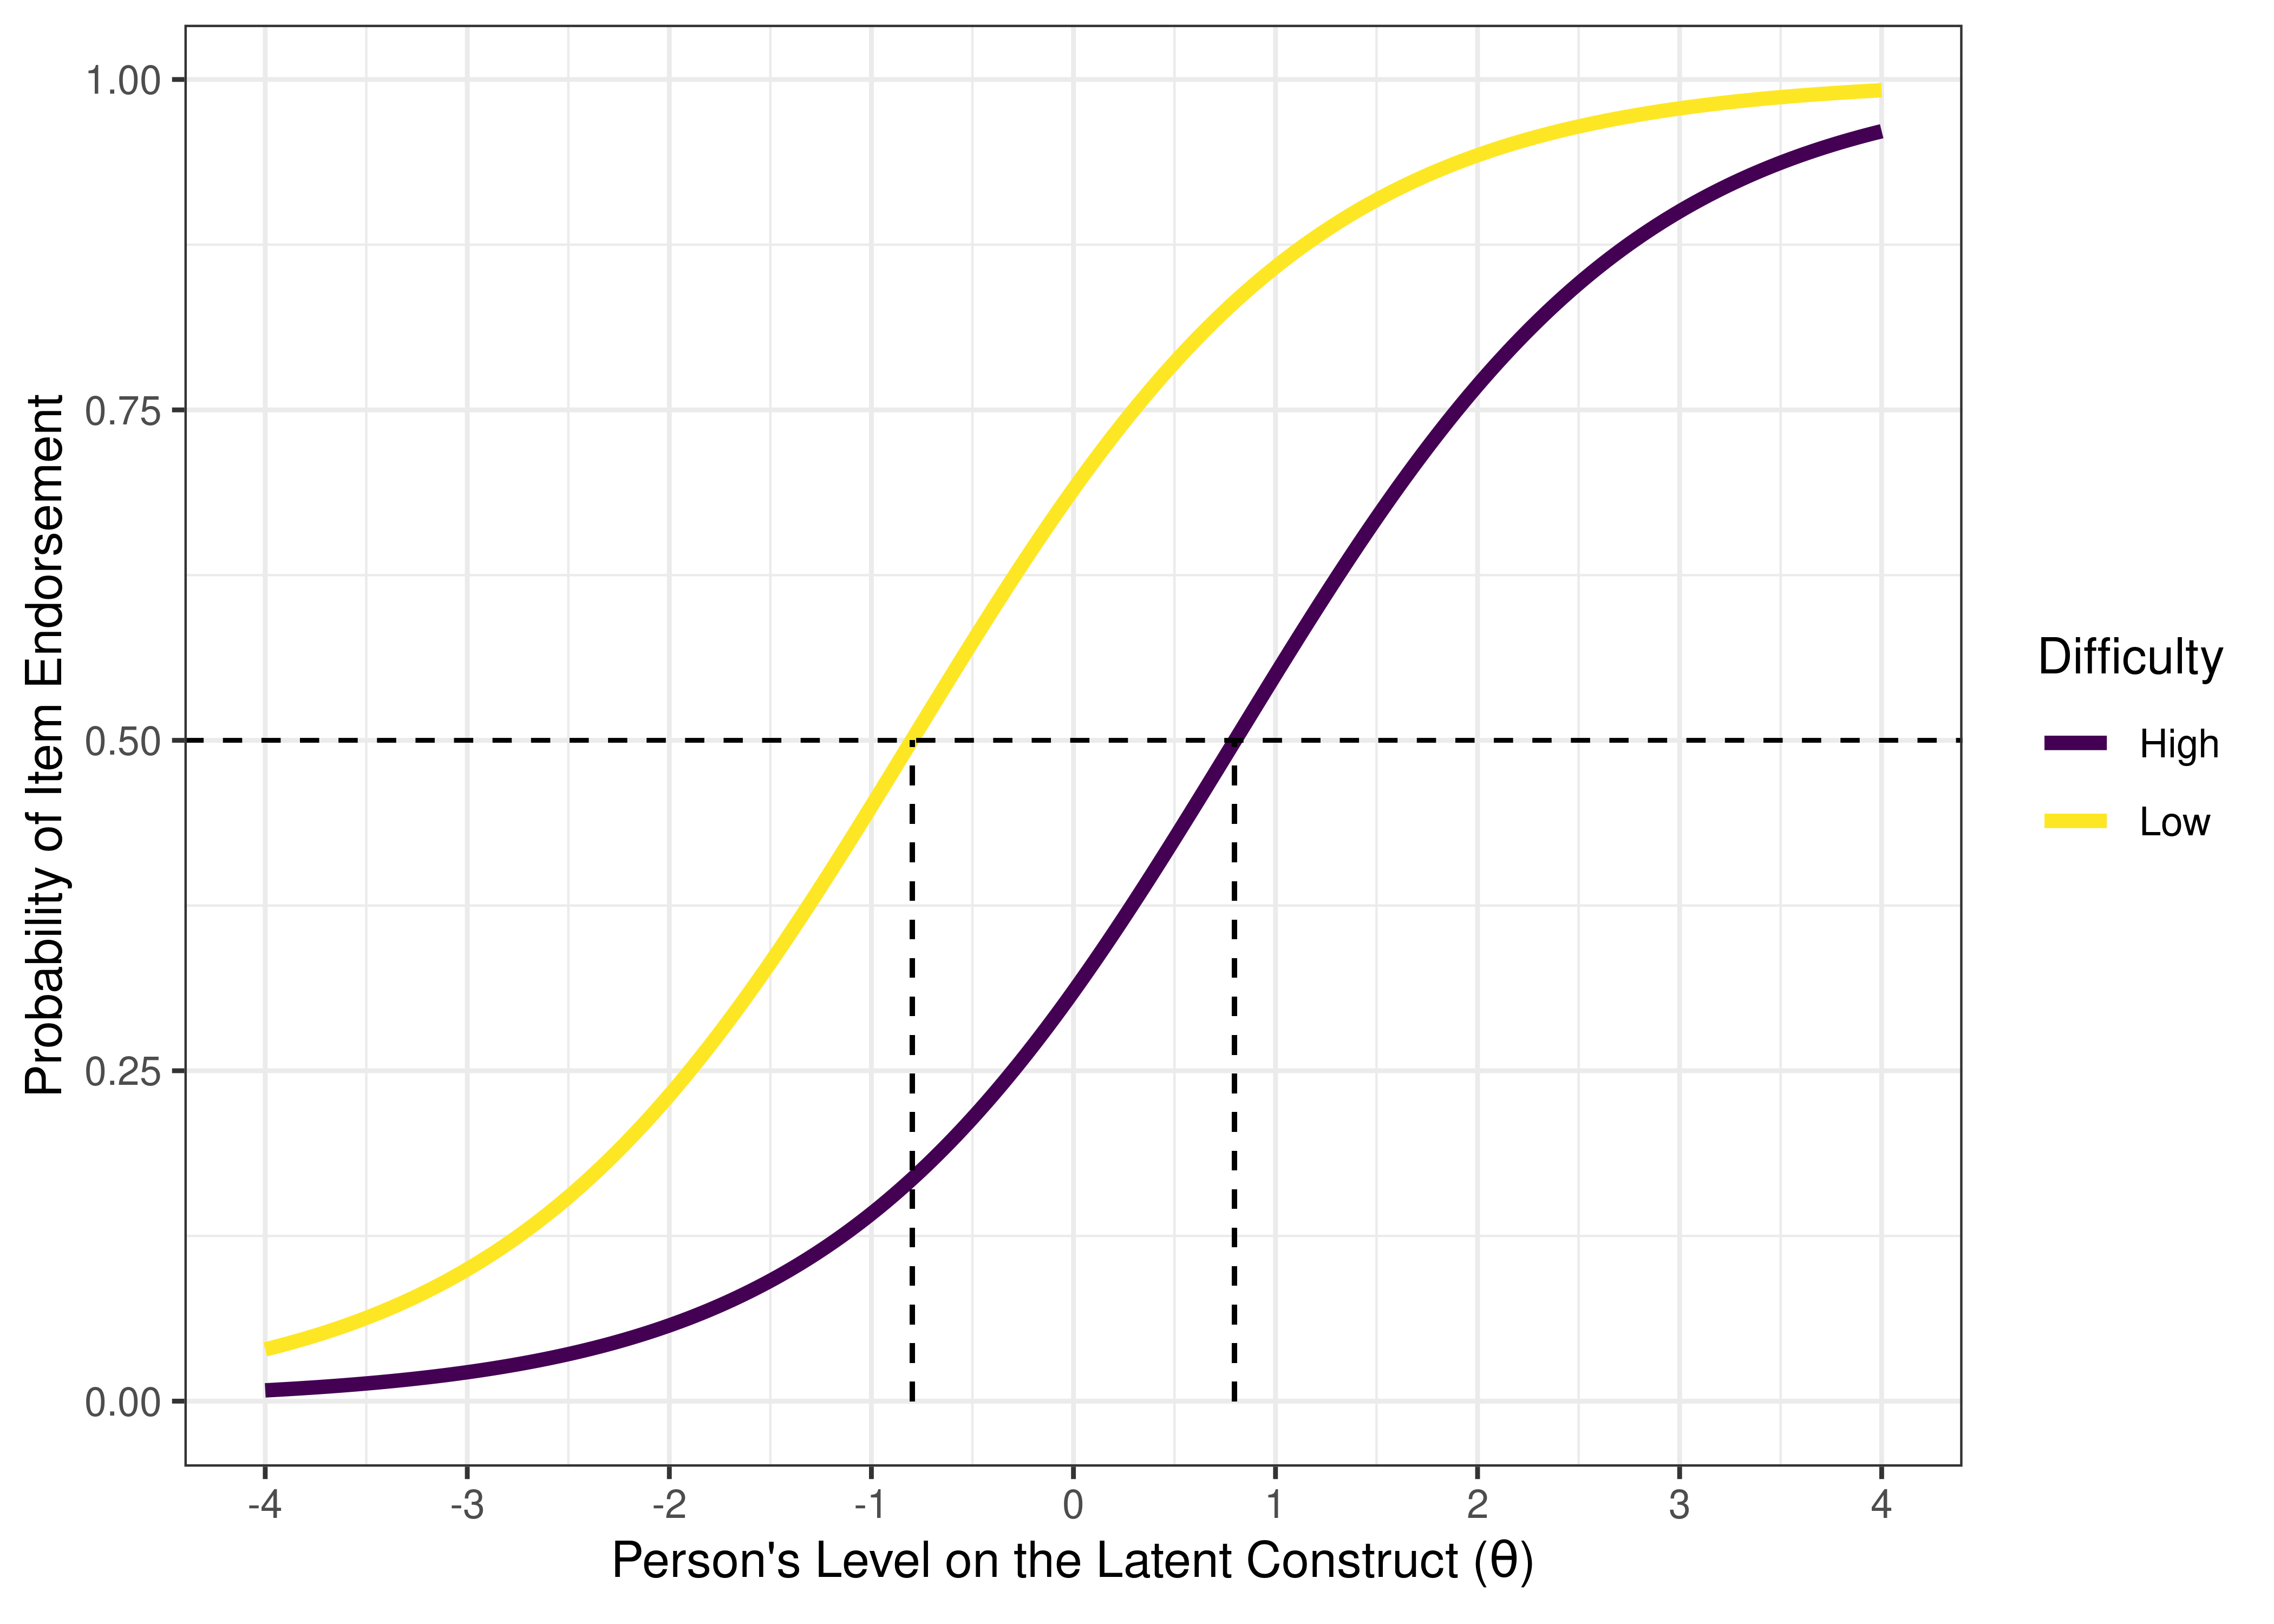 Item Characteristic Curves of an Item With Low Difficulty Versus High Difficulty. The dashed horizontal line indicates a probability of item endorsement of .50. The dashed vertical line is the item difficulty, i.e., the person’s level on the construct (the location on the x-axis) at the inflection point of the item characteristic curve. In a two-parameter logistic model, the inflection point corresponds to the probability of item endorsement is 50%. Thus, in a two-parameter logistic model, the difficulty of an item is the person’s level on the construct where the probability of endorsing the item is 50%.